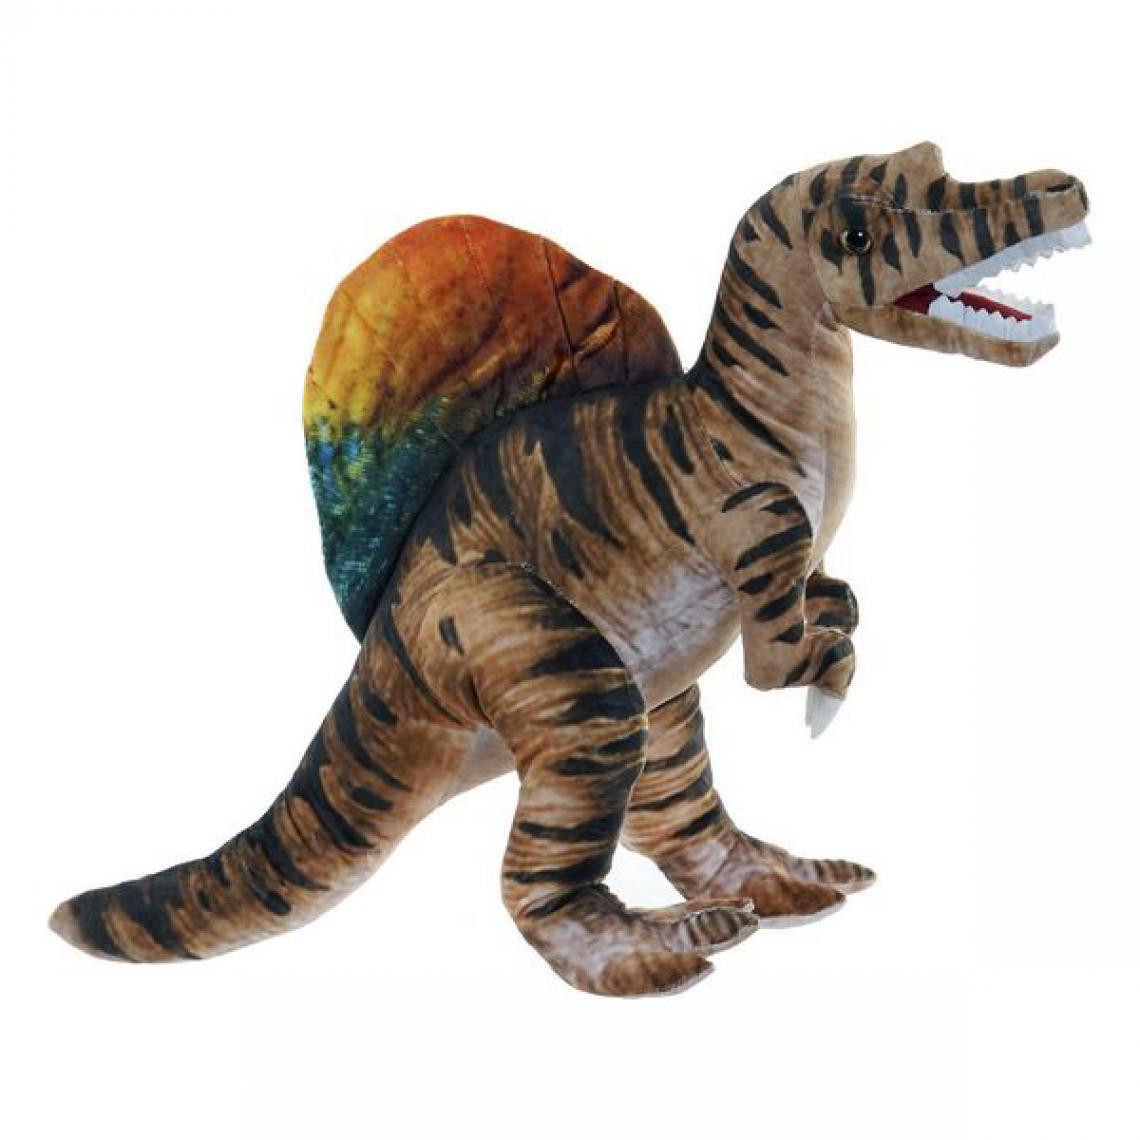 Unknown - Jouet Peluche DKD Home Decor Dinosaure Polyester (36 x 18 x 36 cm) - Animaux